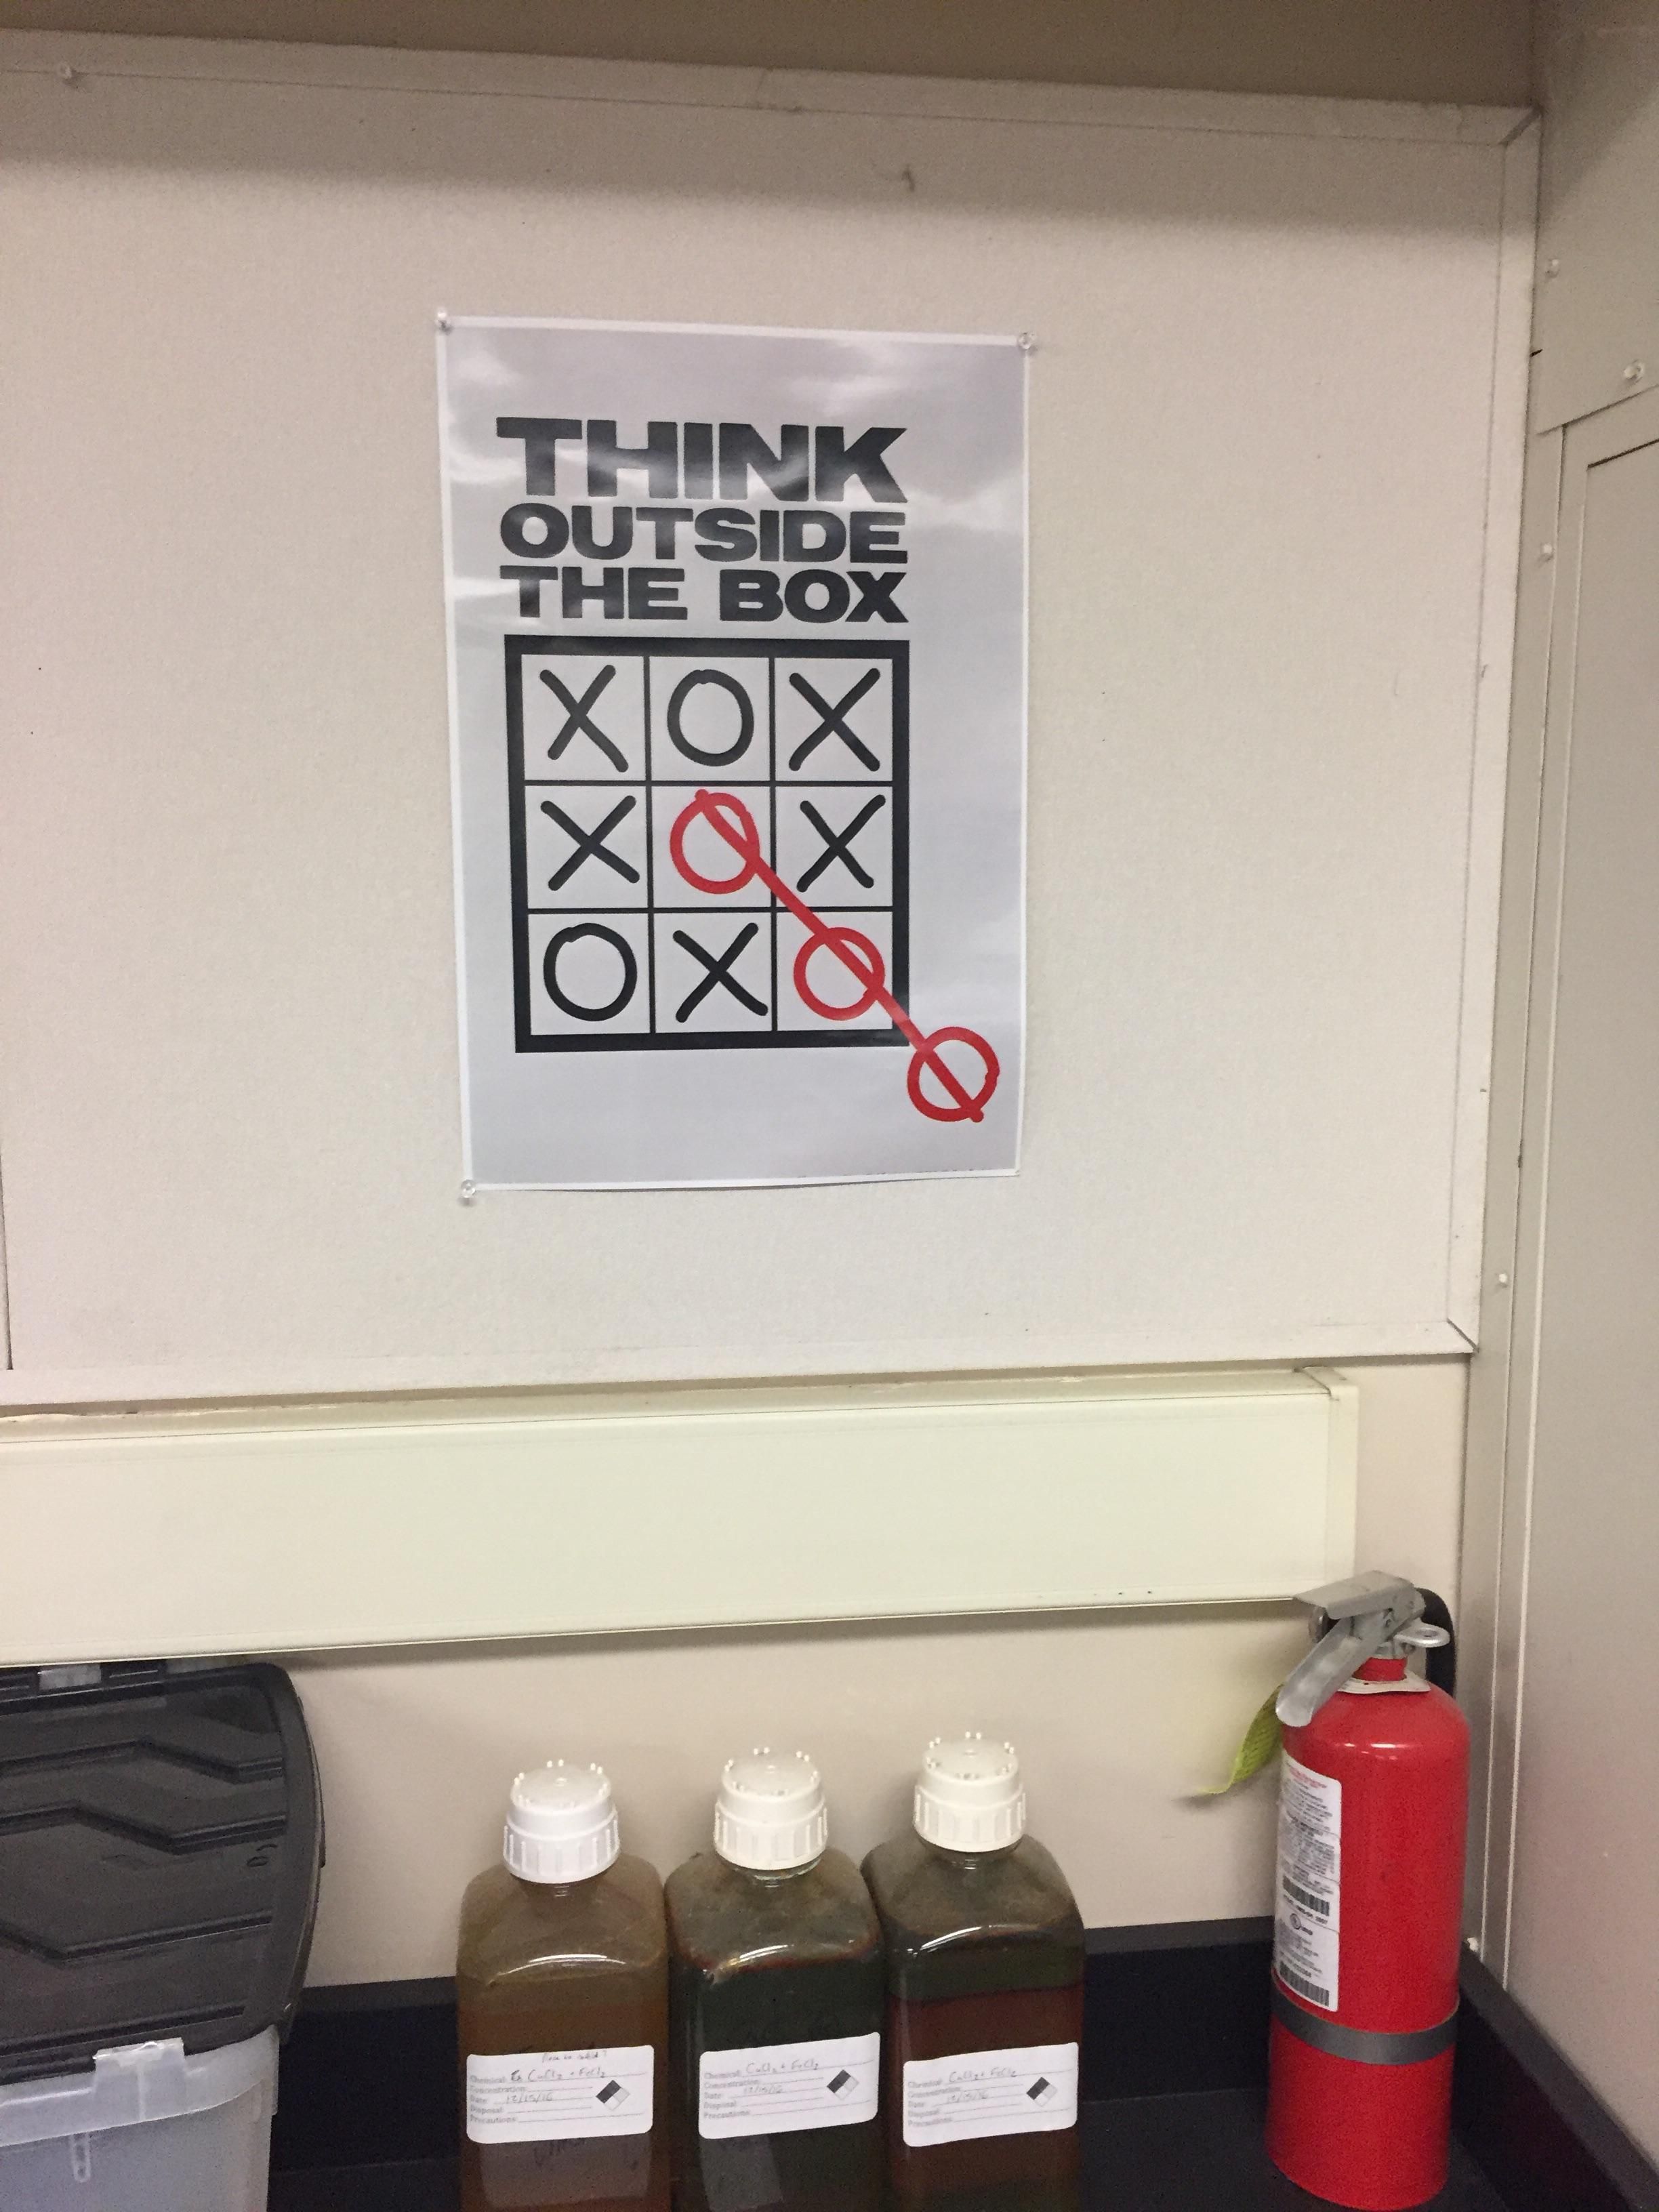 This poster in class says to cheat at Tic-Tac Toe...